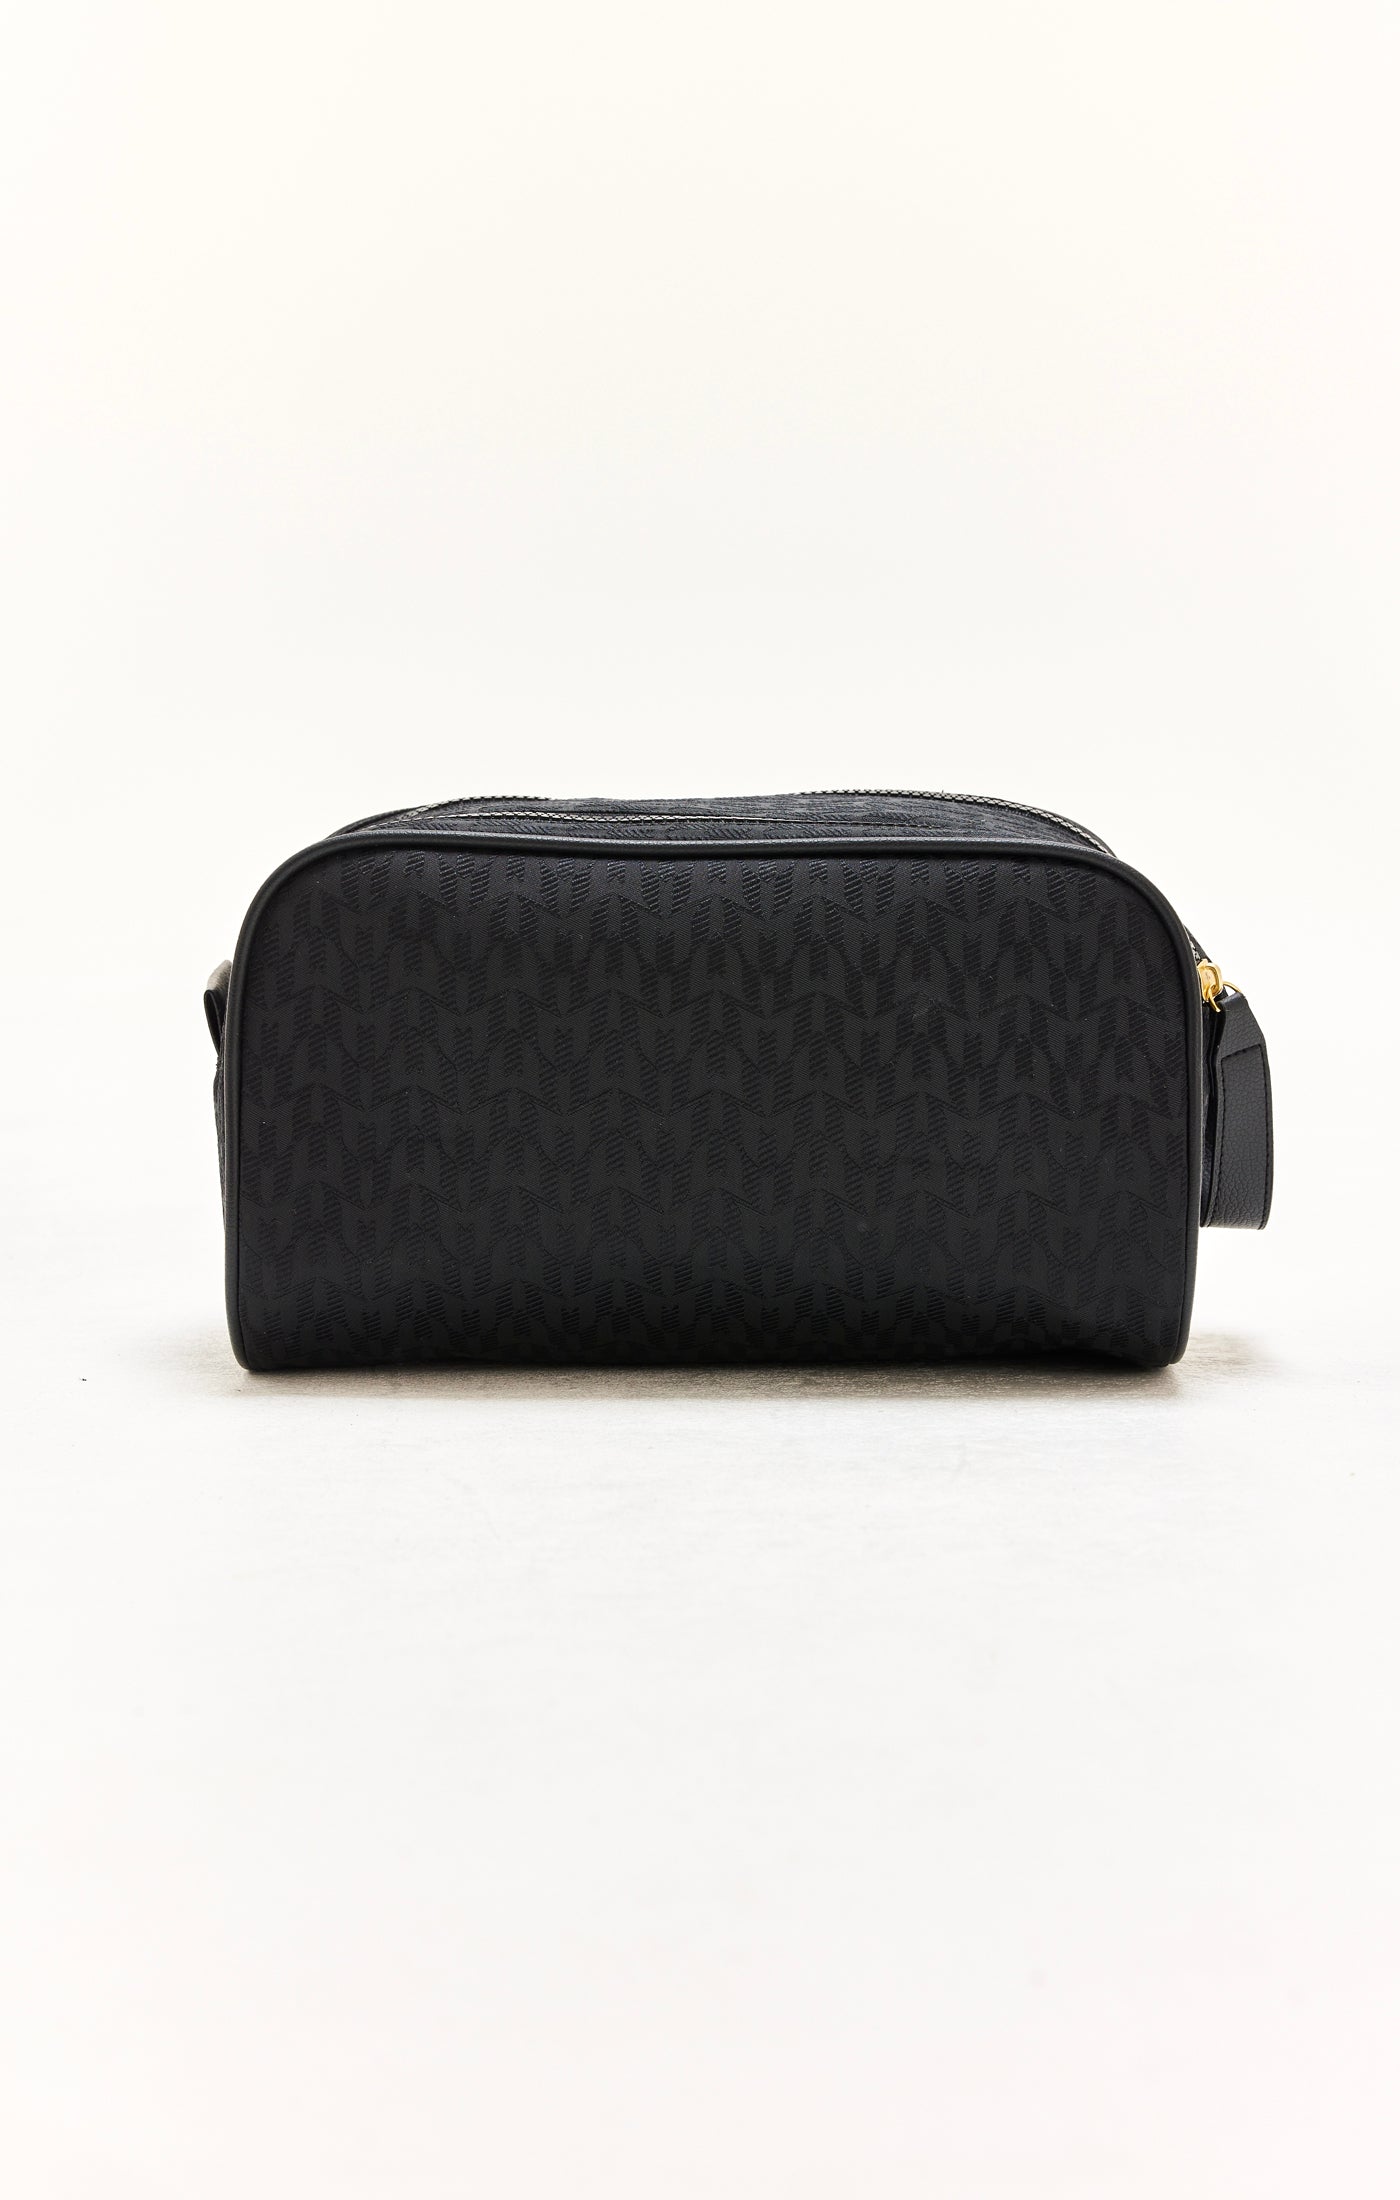 Load image into Gallery viewer, Messi x SikSilk Black Toiletries Bag (2)